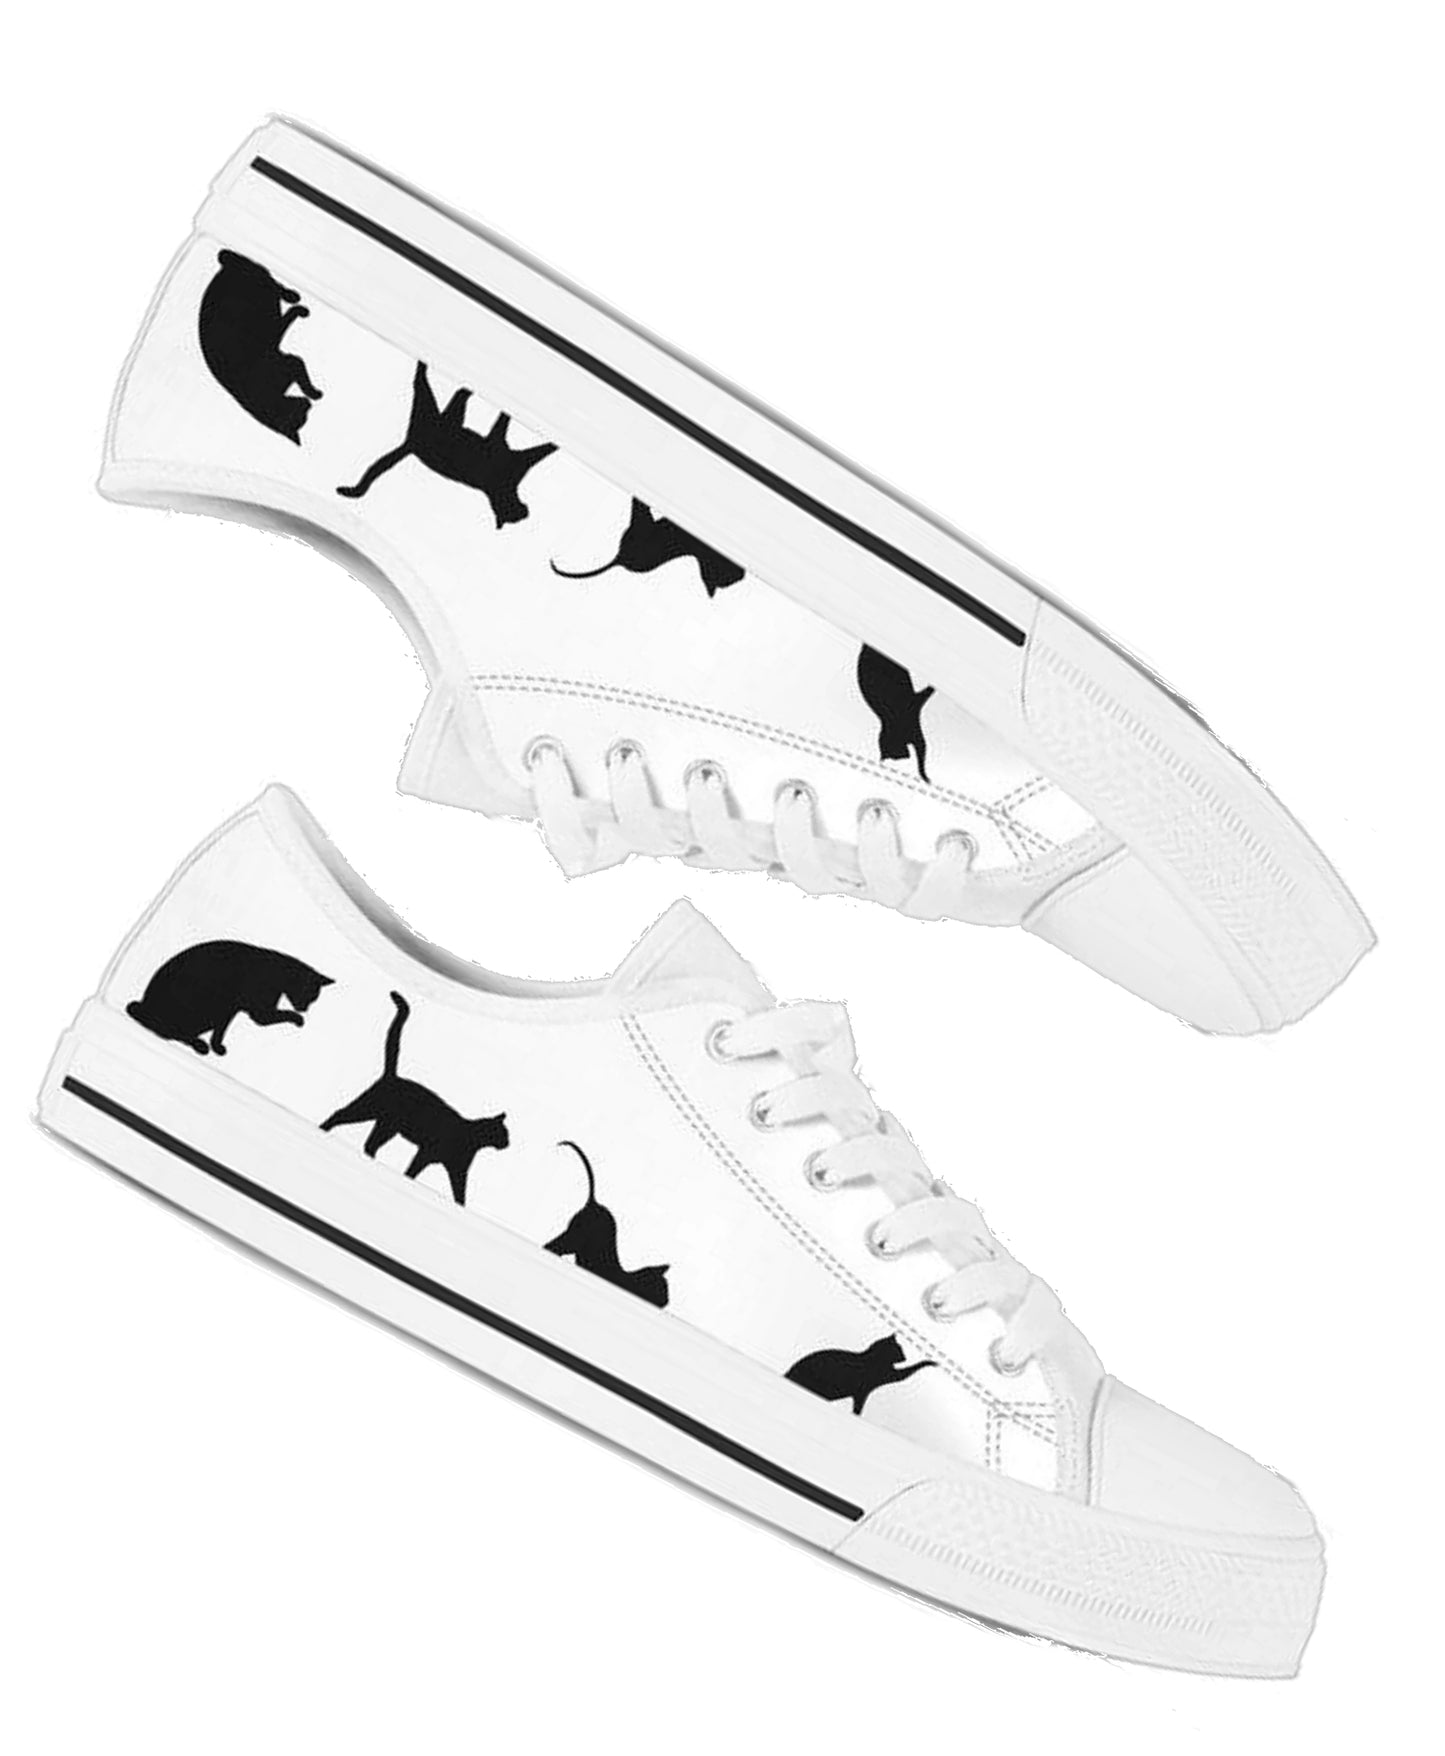 Cat Silhouettes - READY TO SHIP